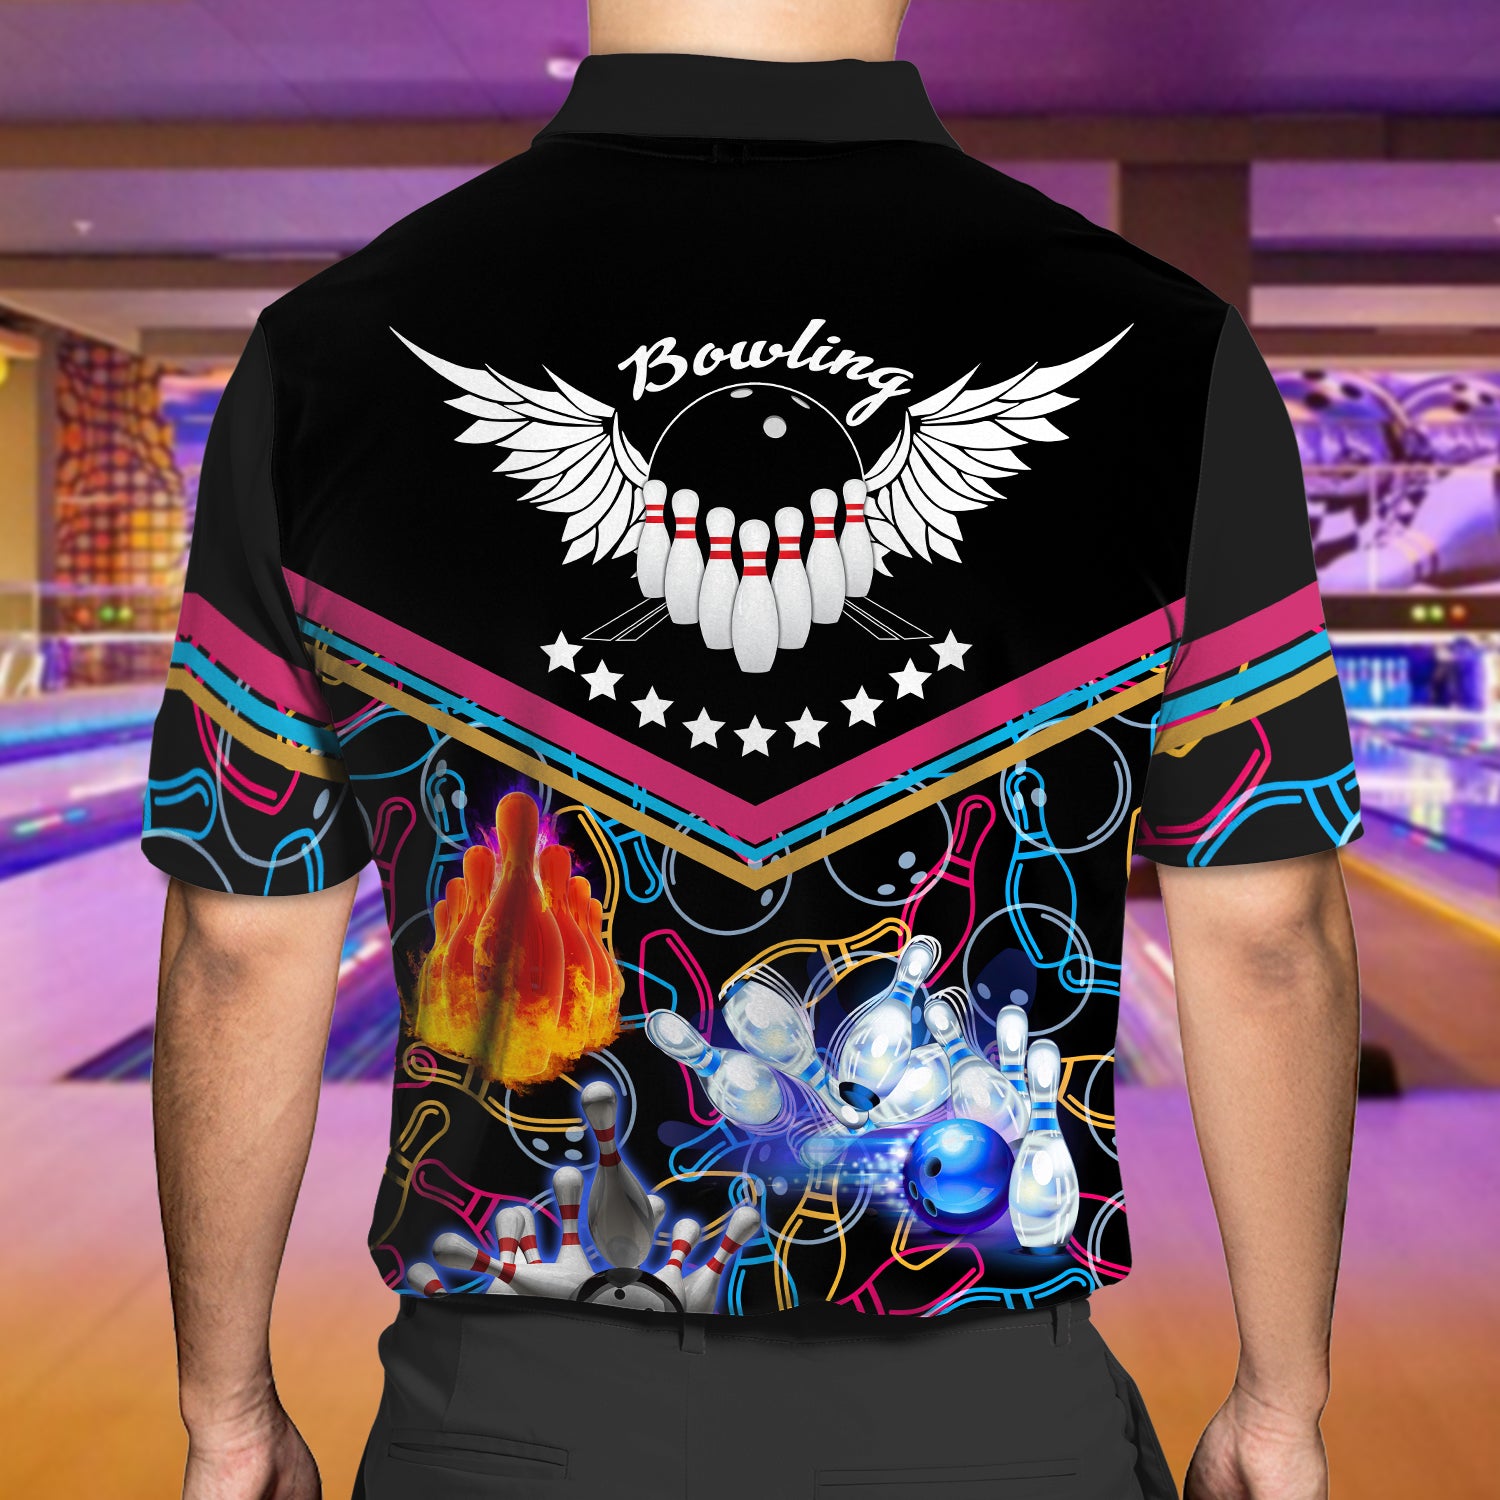 Bowling 02 - Personalized Name 3D Polo Shirt -Loop- Ntp-222